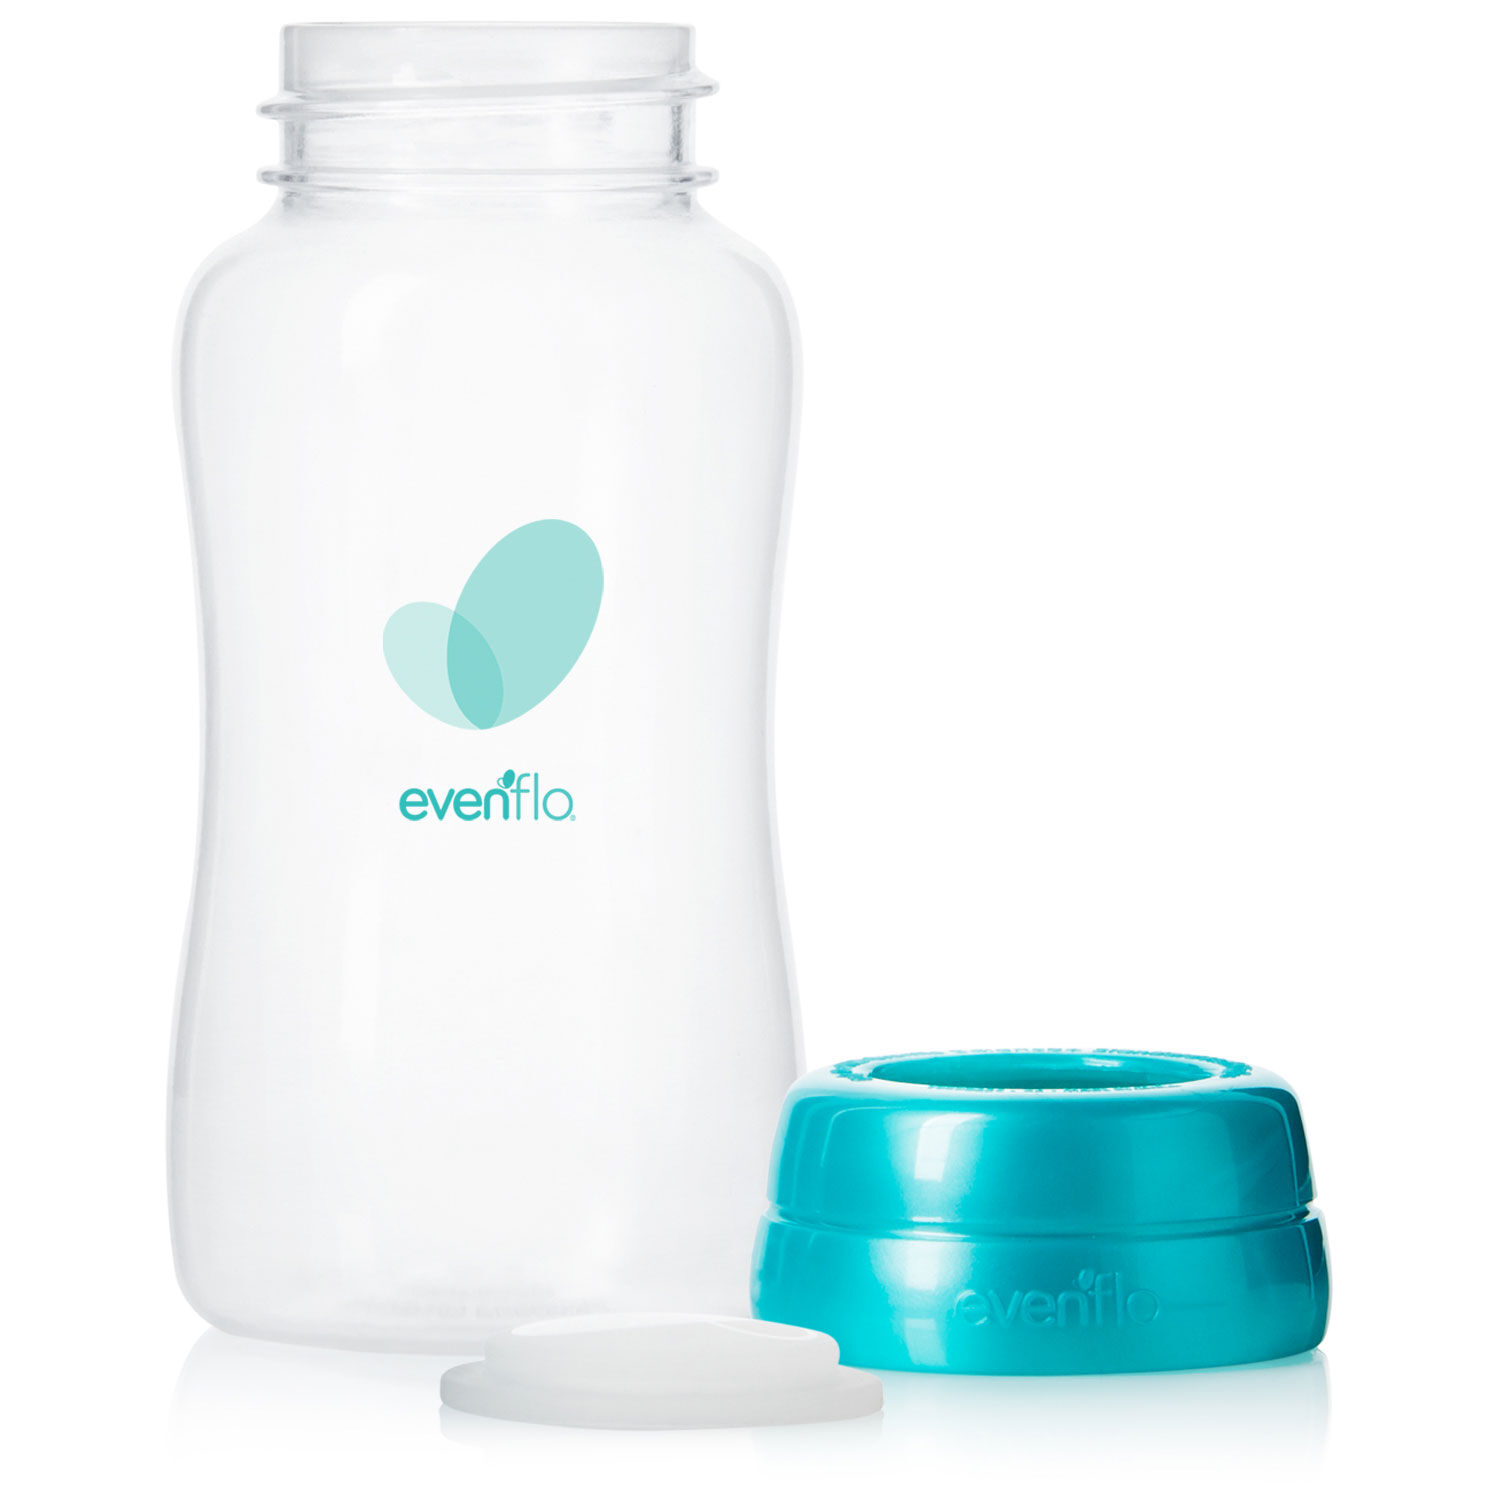 6 Pack 5oz Evenflo Advanced Breast Milk Collection Bottles BPA FREE 937518 